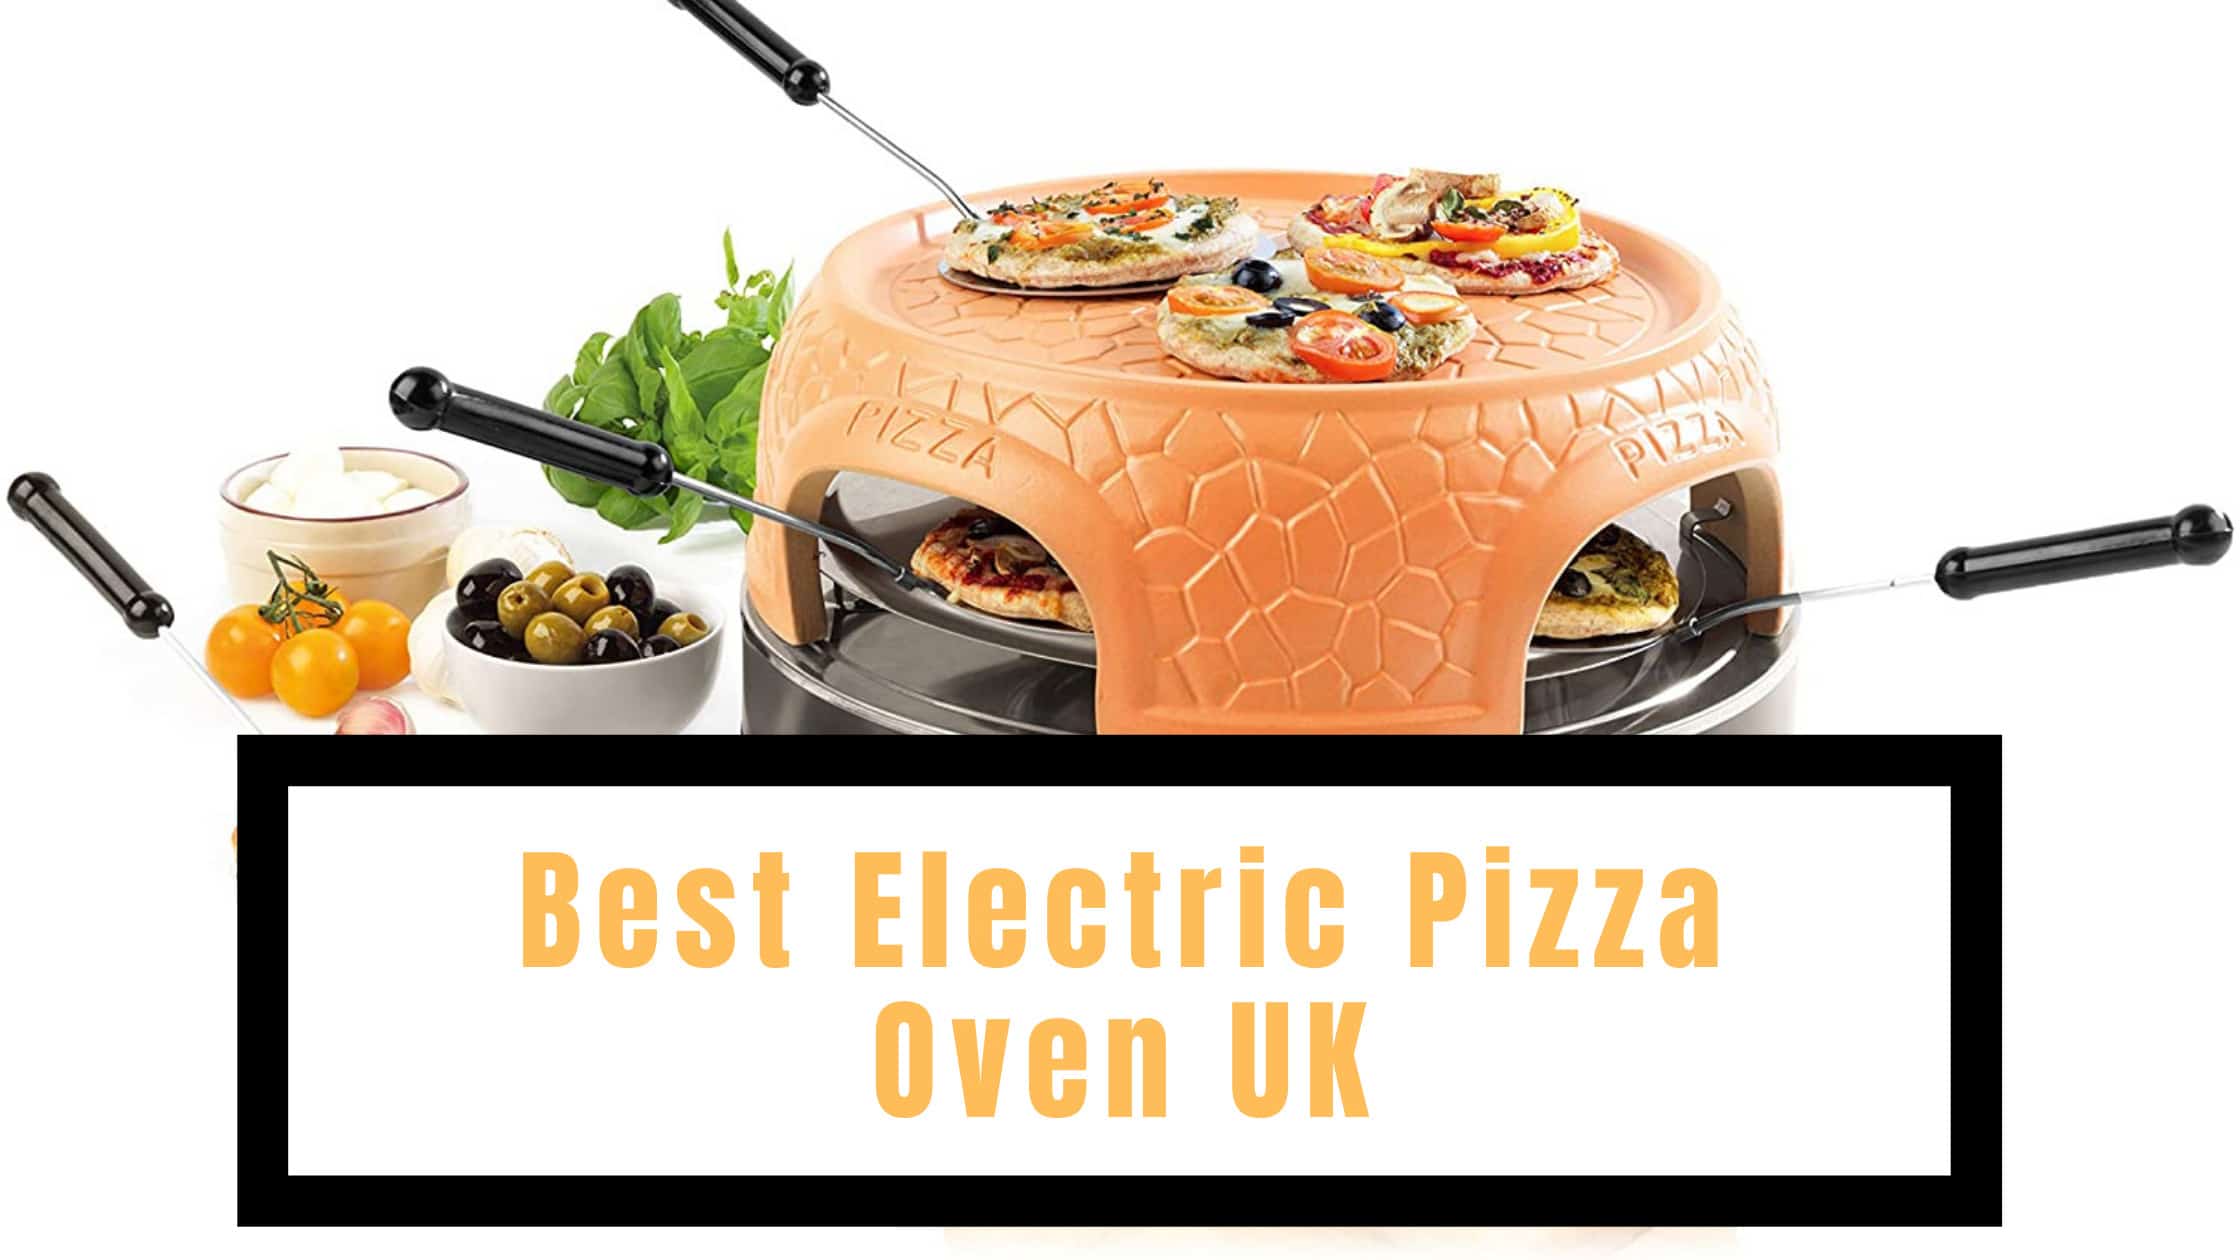 Best Electric Pizza Oven UK